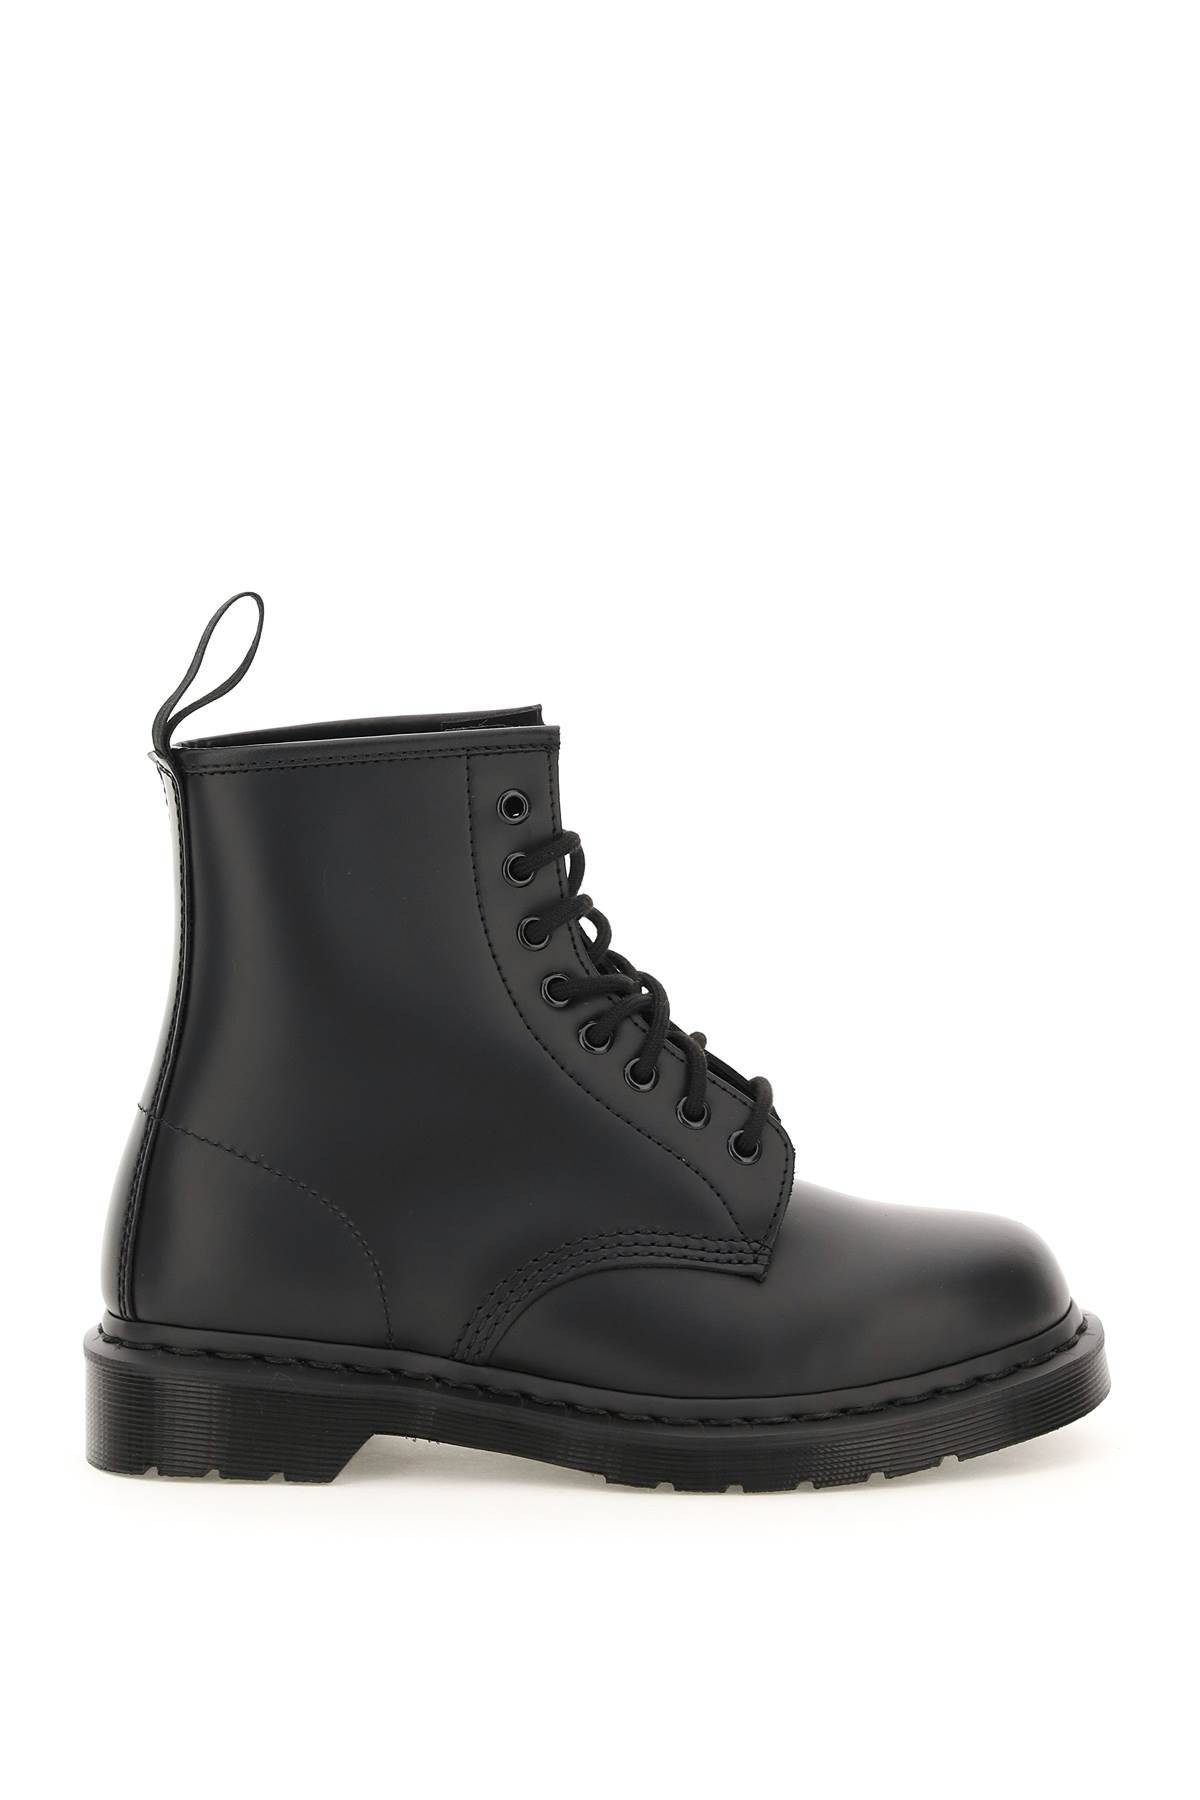 DR.MARTENS DR. MARTENS 1460 mono smooth lace-up combat boots